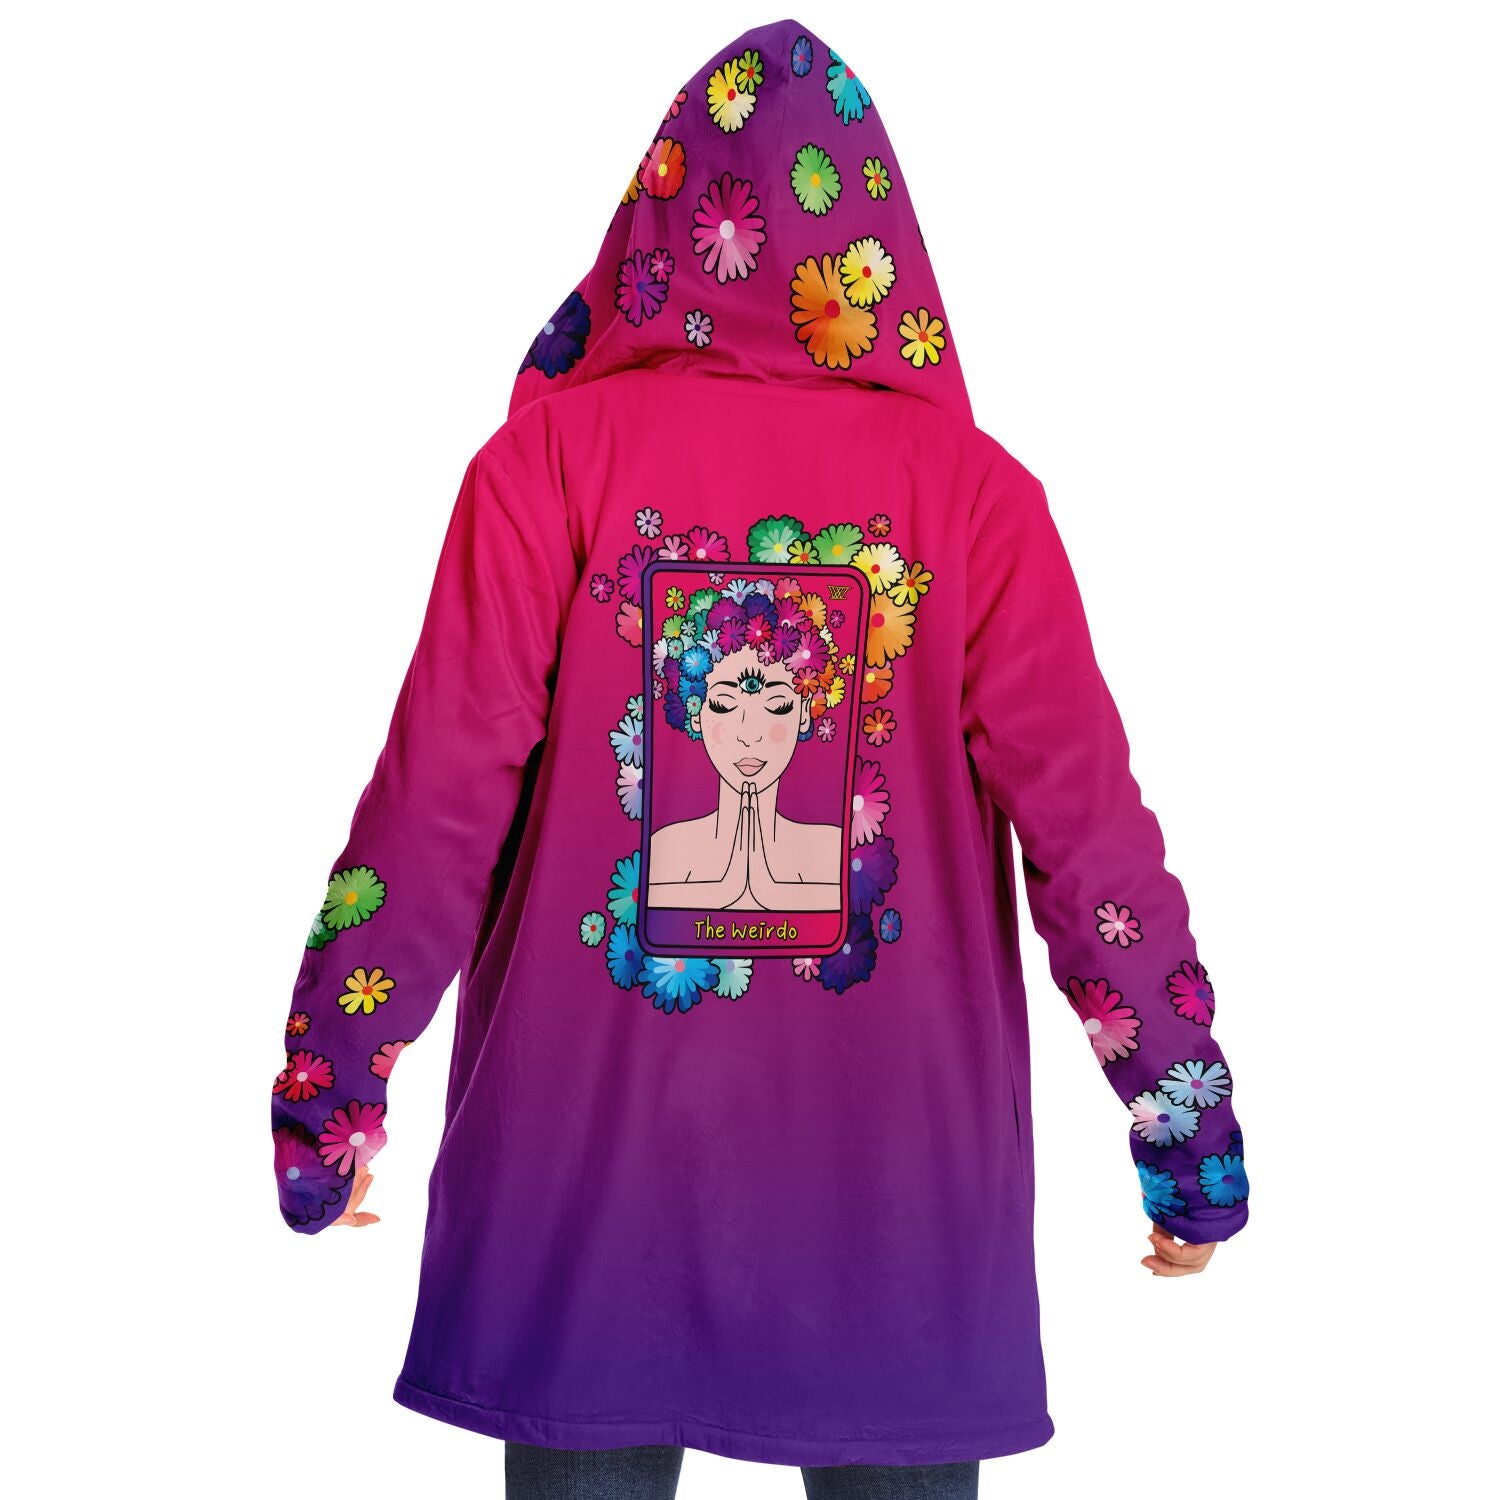 WEIRDO | Micro fleece vest for weirdos who are into spirituality and tarot cards. This pink and purple vest has flowers and THE WEIRDO tarot card shown on the micro fleece vest.